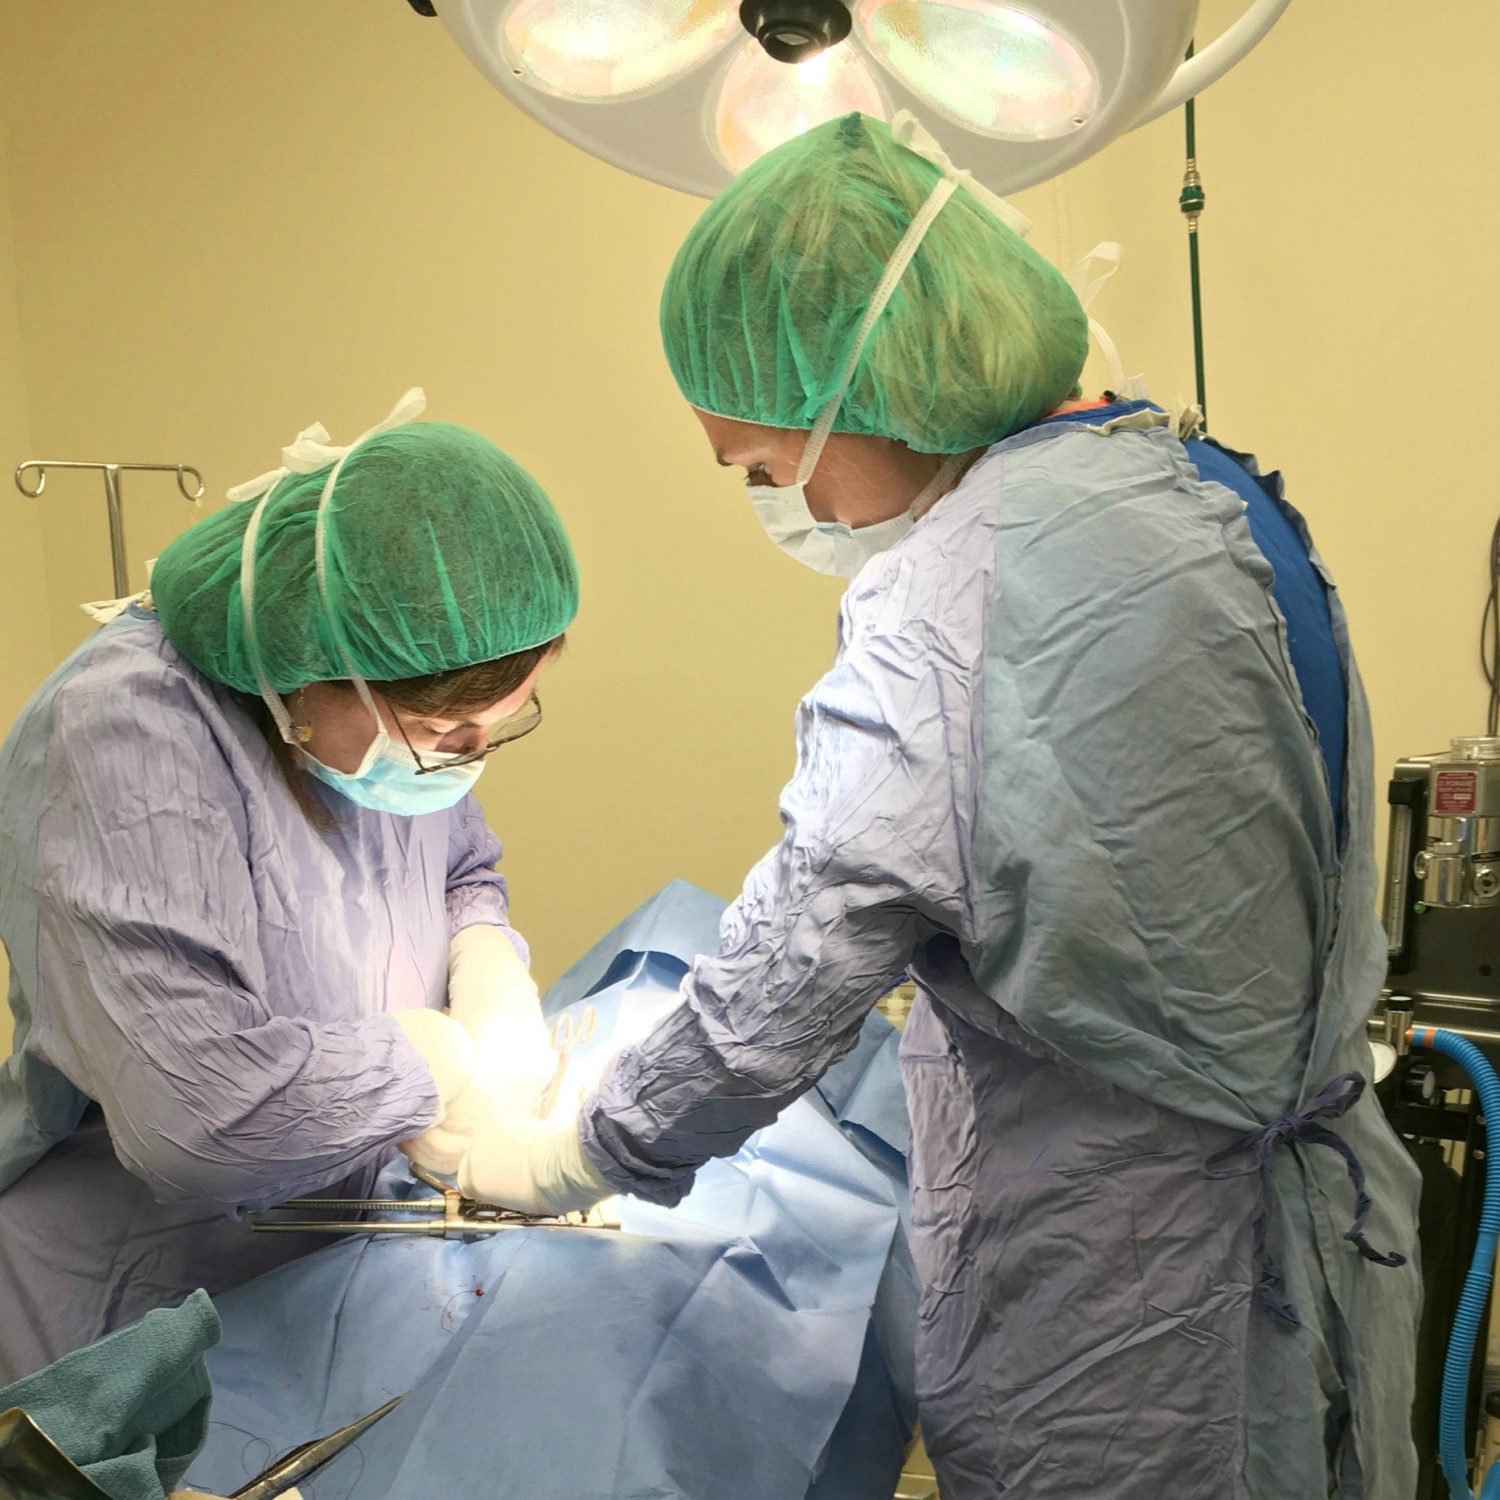 Two veterinary worker preforming surgery